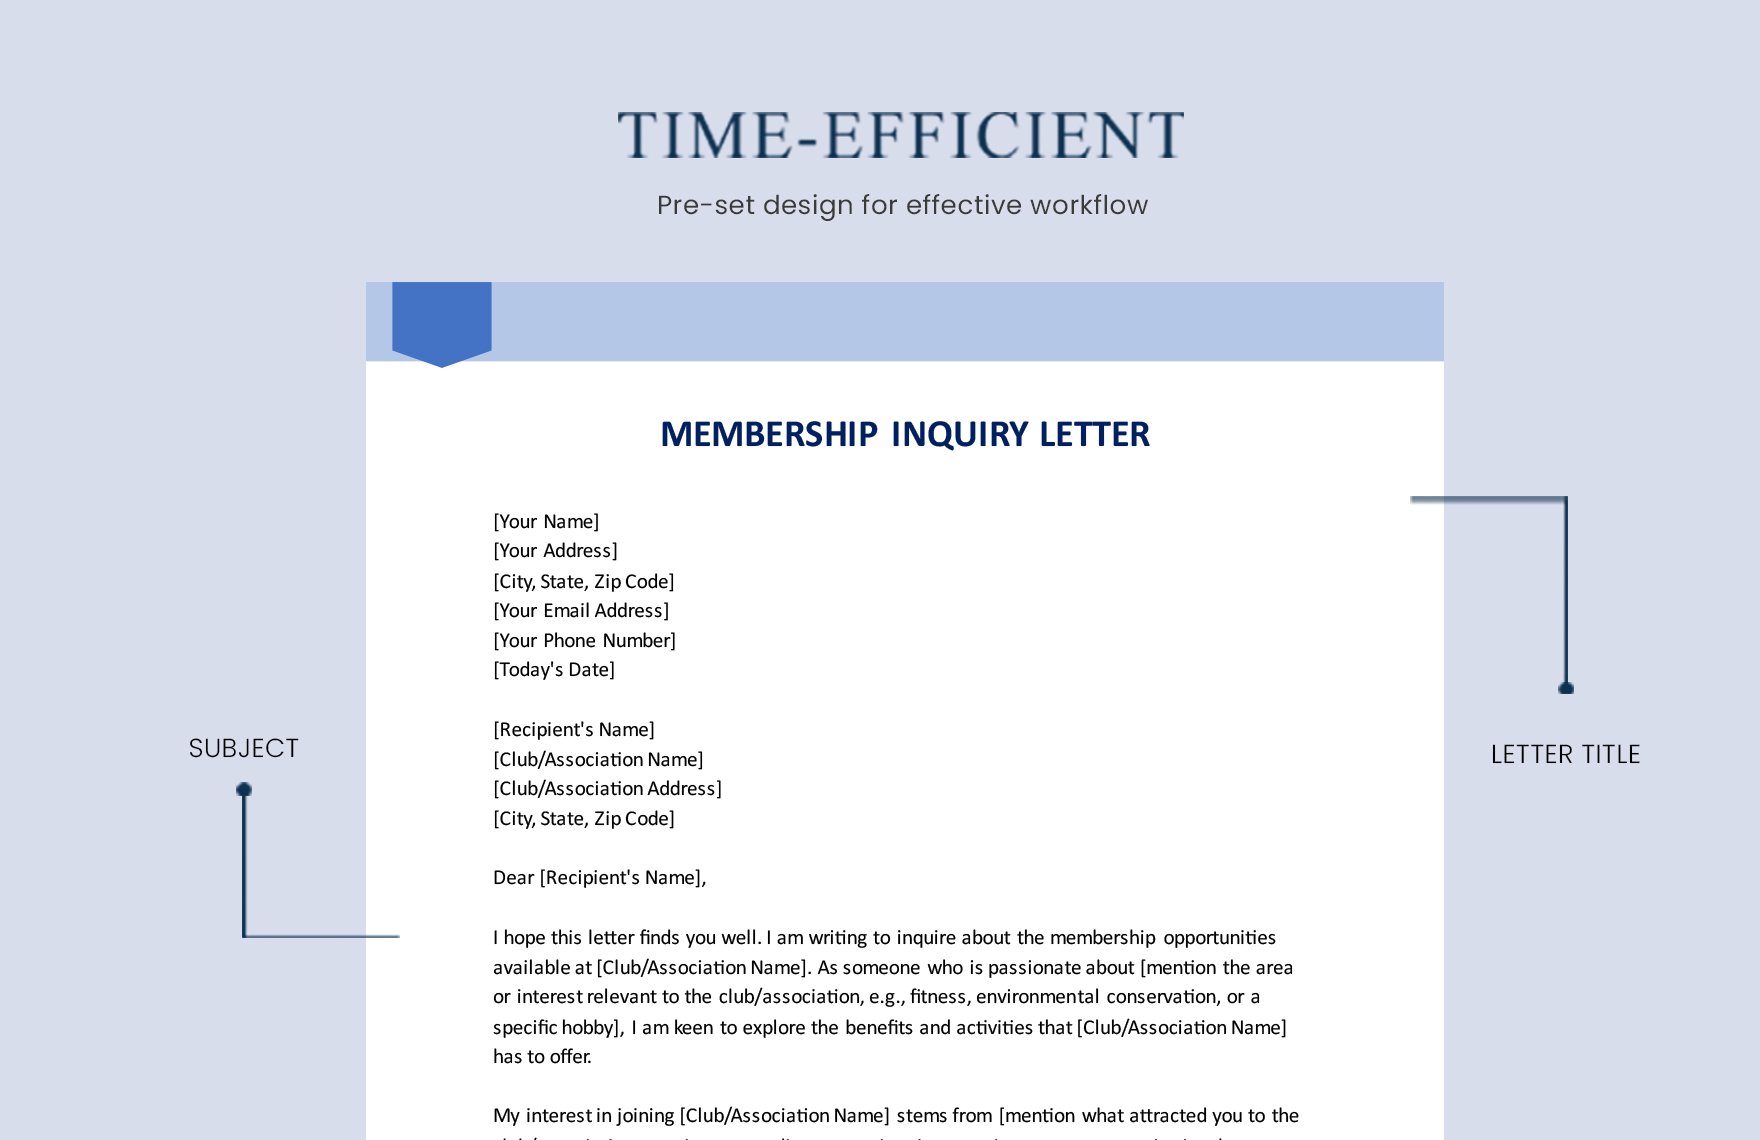 Membership Inquiry Letter